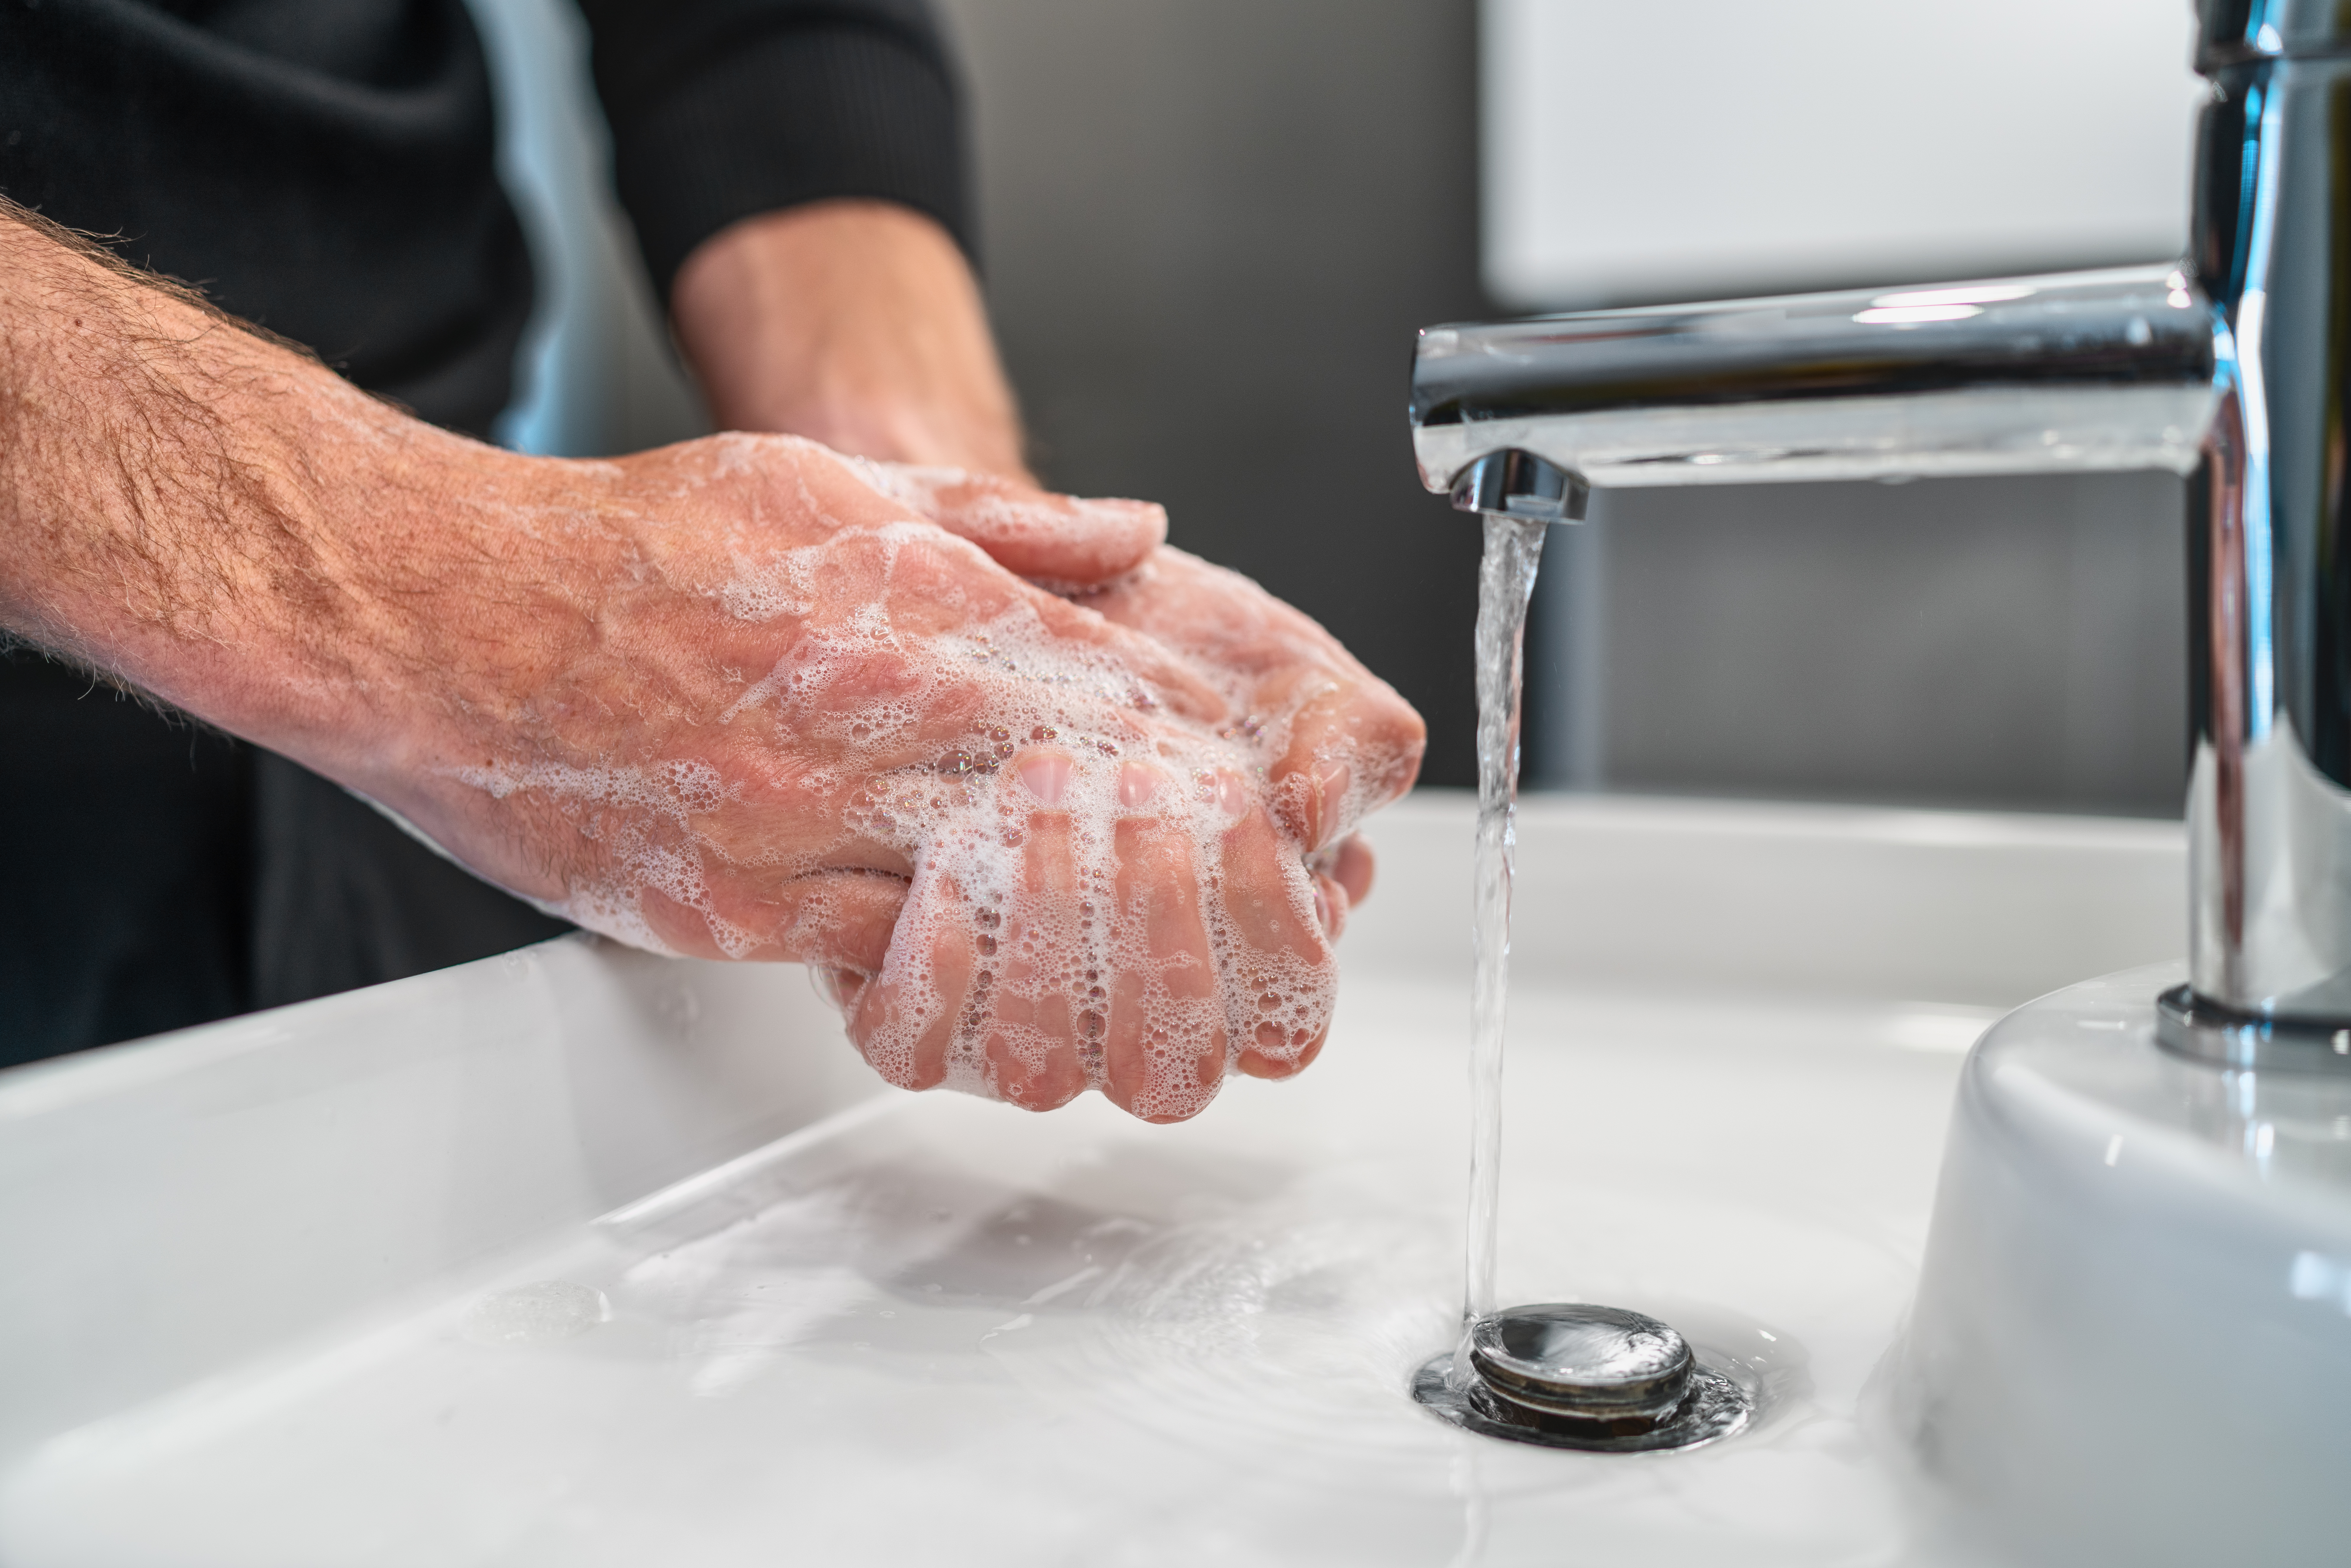 hands lathered in soap over a sink